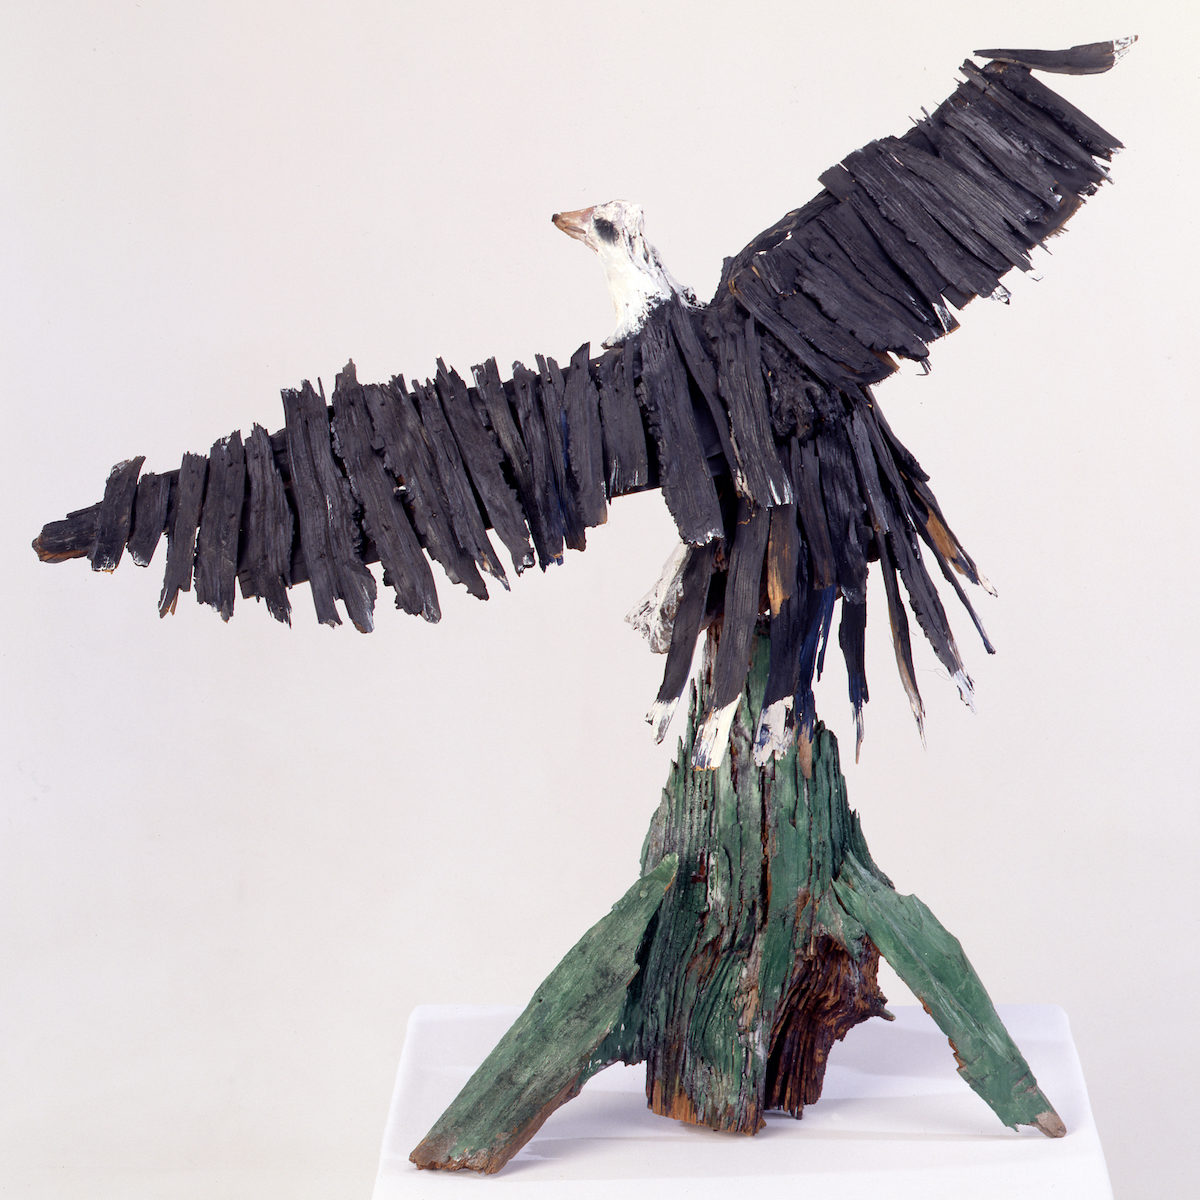 Ralph Griffin, Eagle (1988)
© Estate of Ralph Griffin/ Artists Rights Society (ARS)/ New York Image: Stephen Pitkin/Pitkin Studio